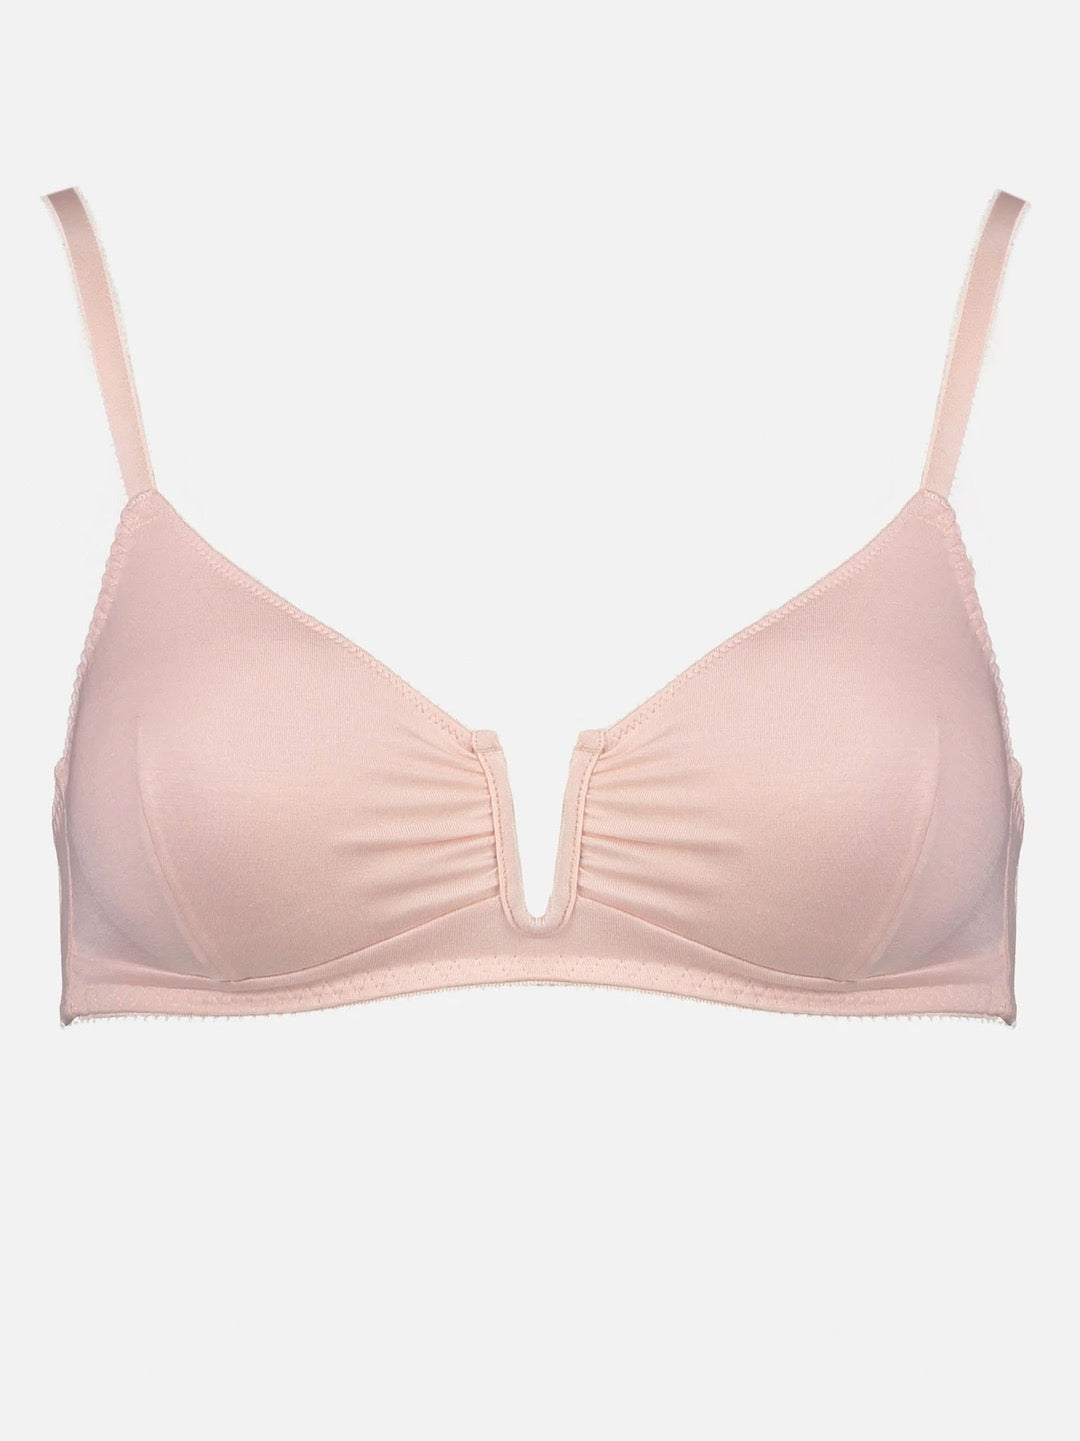 A Videris Angela Bra - Rosy, in a light pink color.